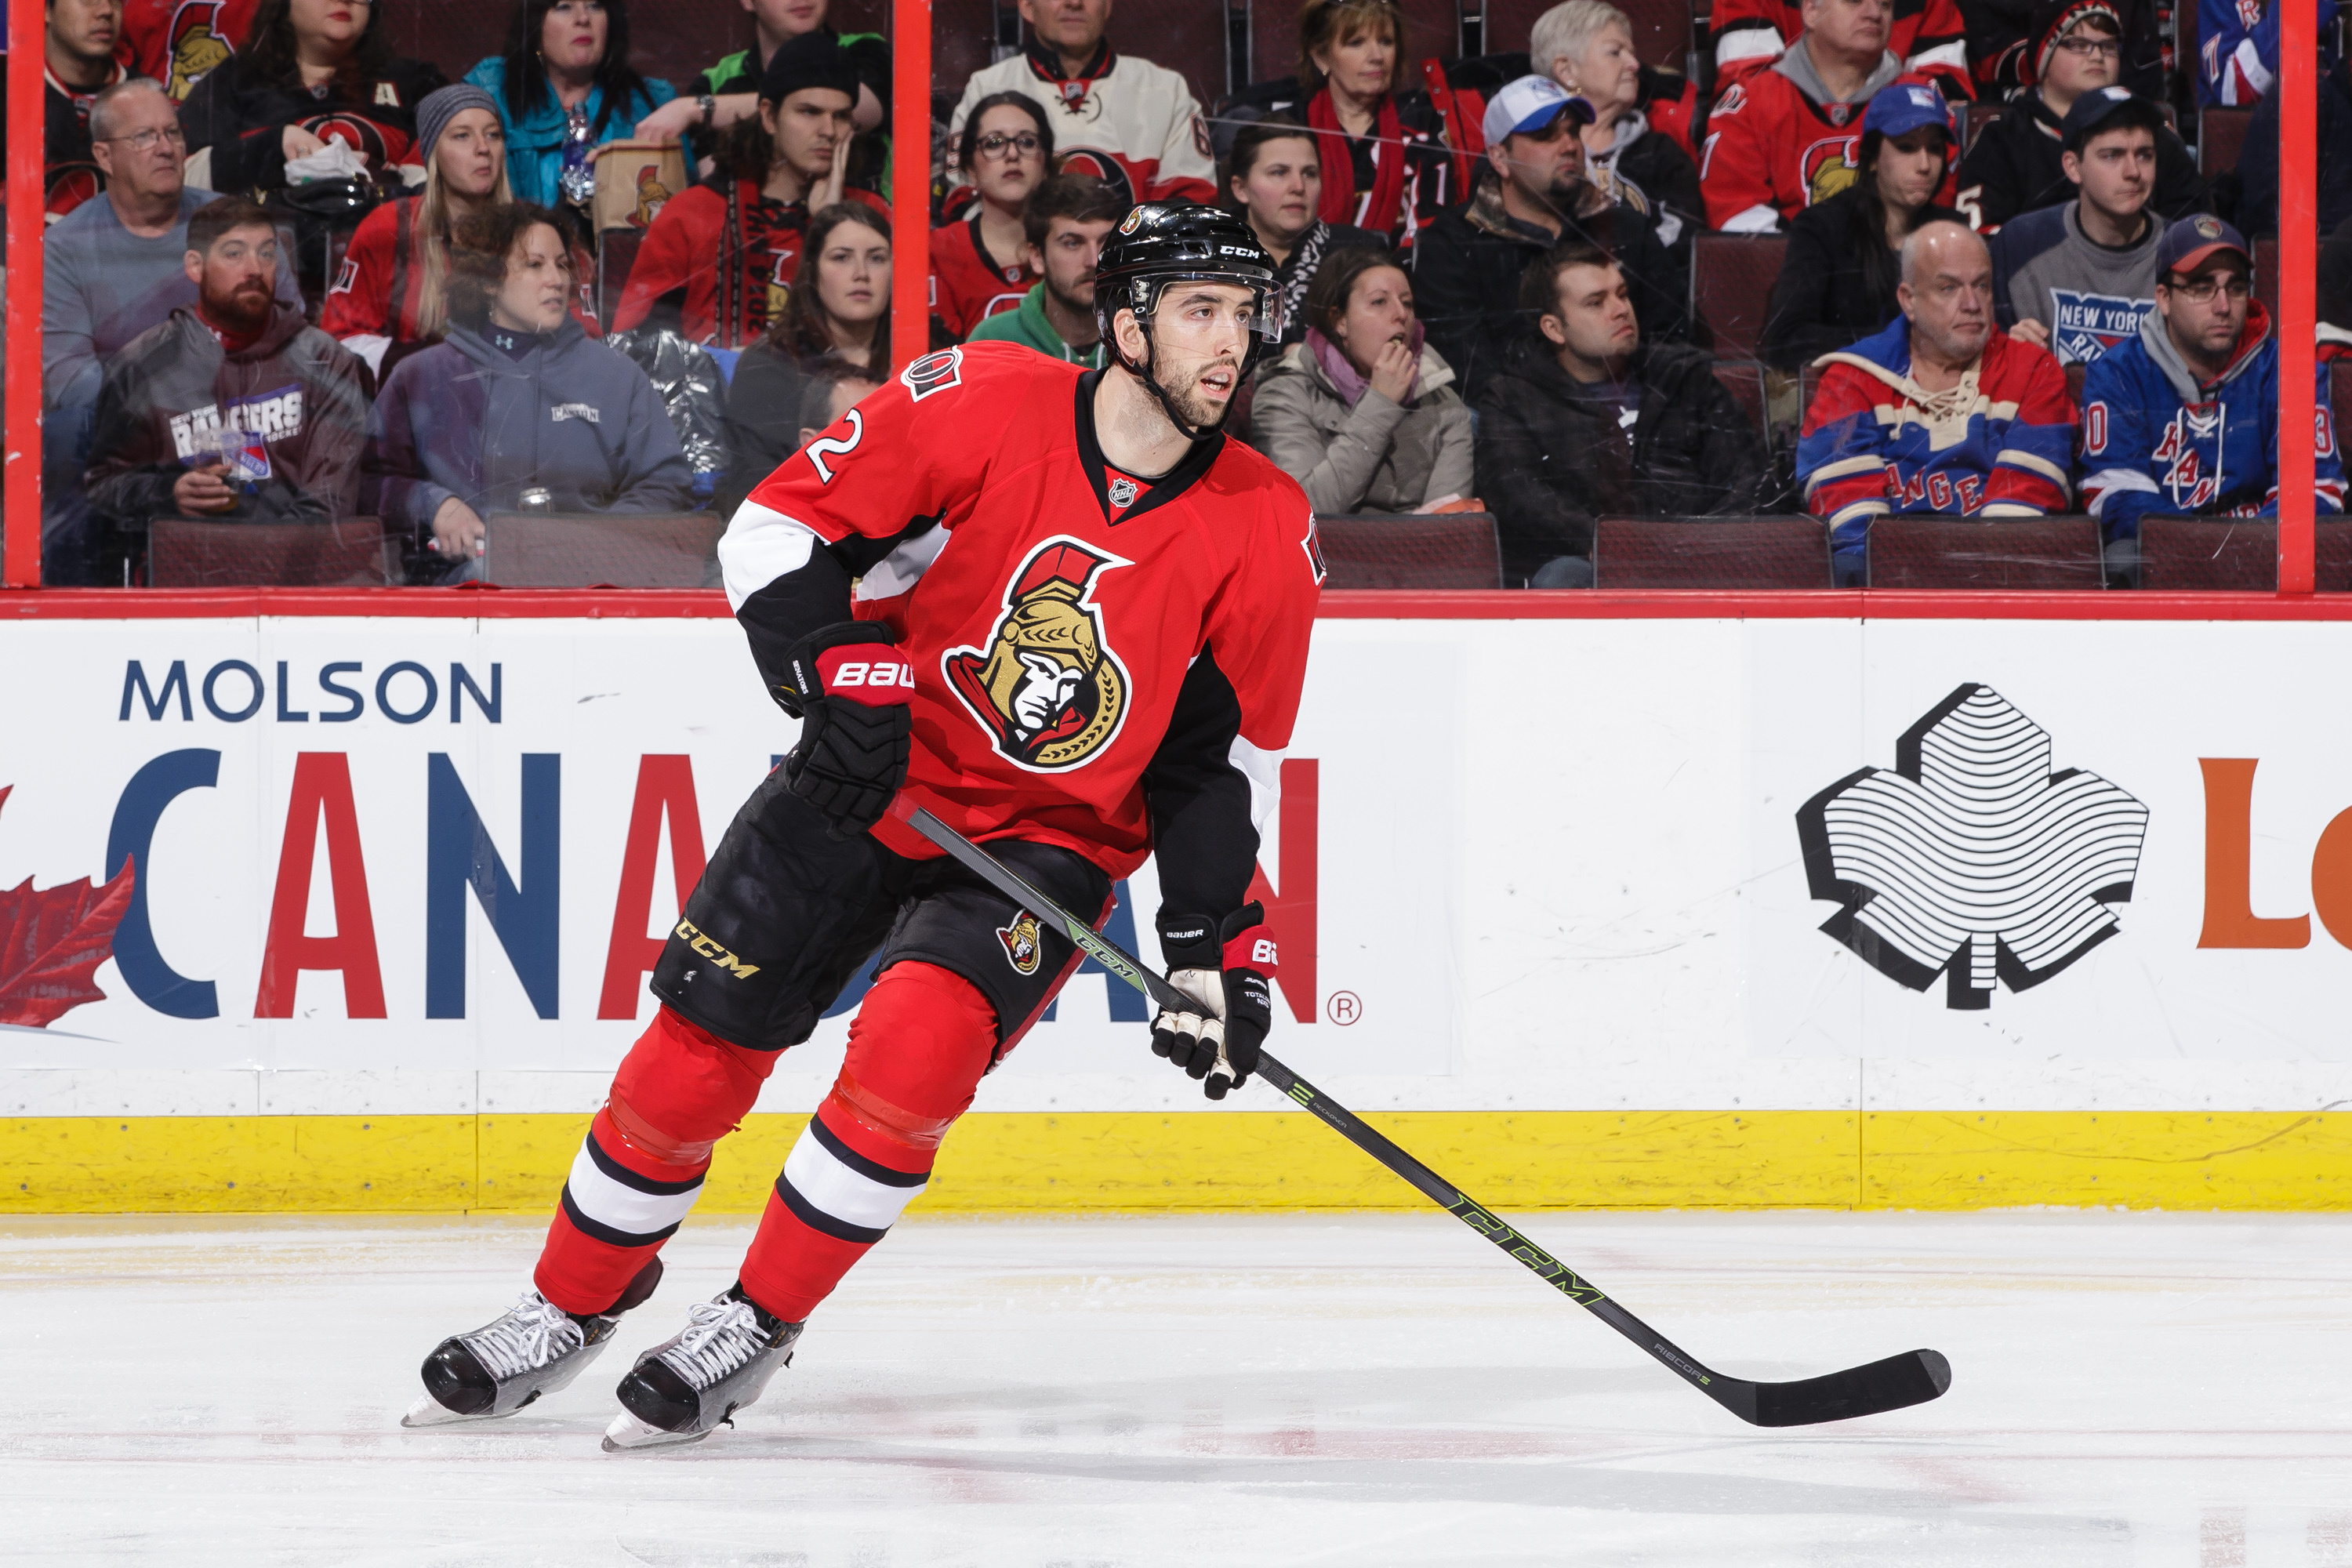 Jared Cowen could be a player unwanted in one market who will flourish in another, given a chance